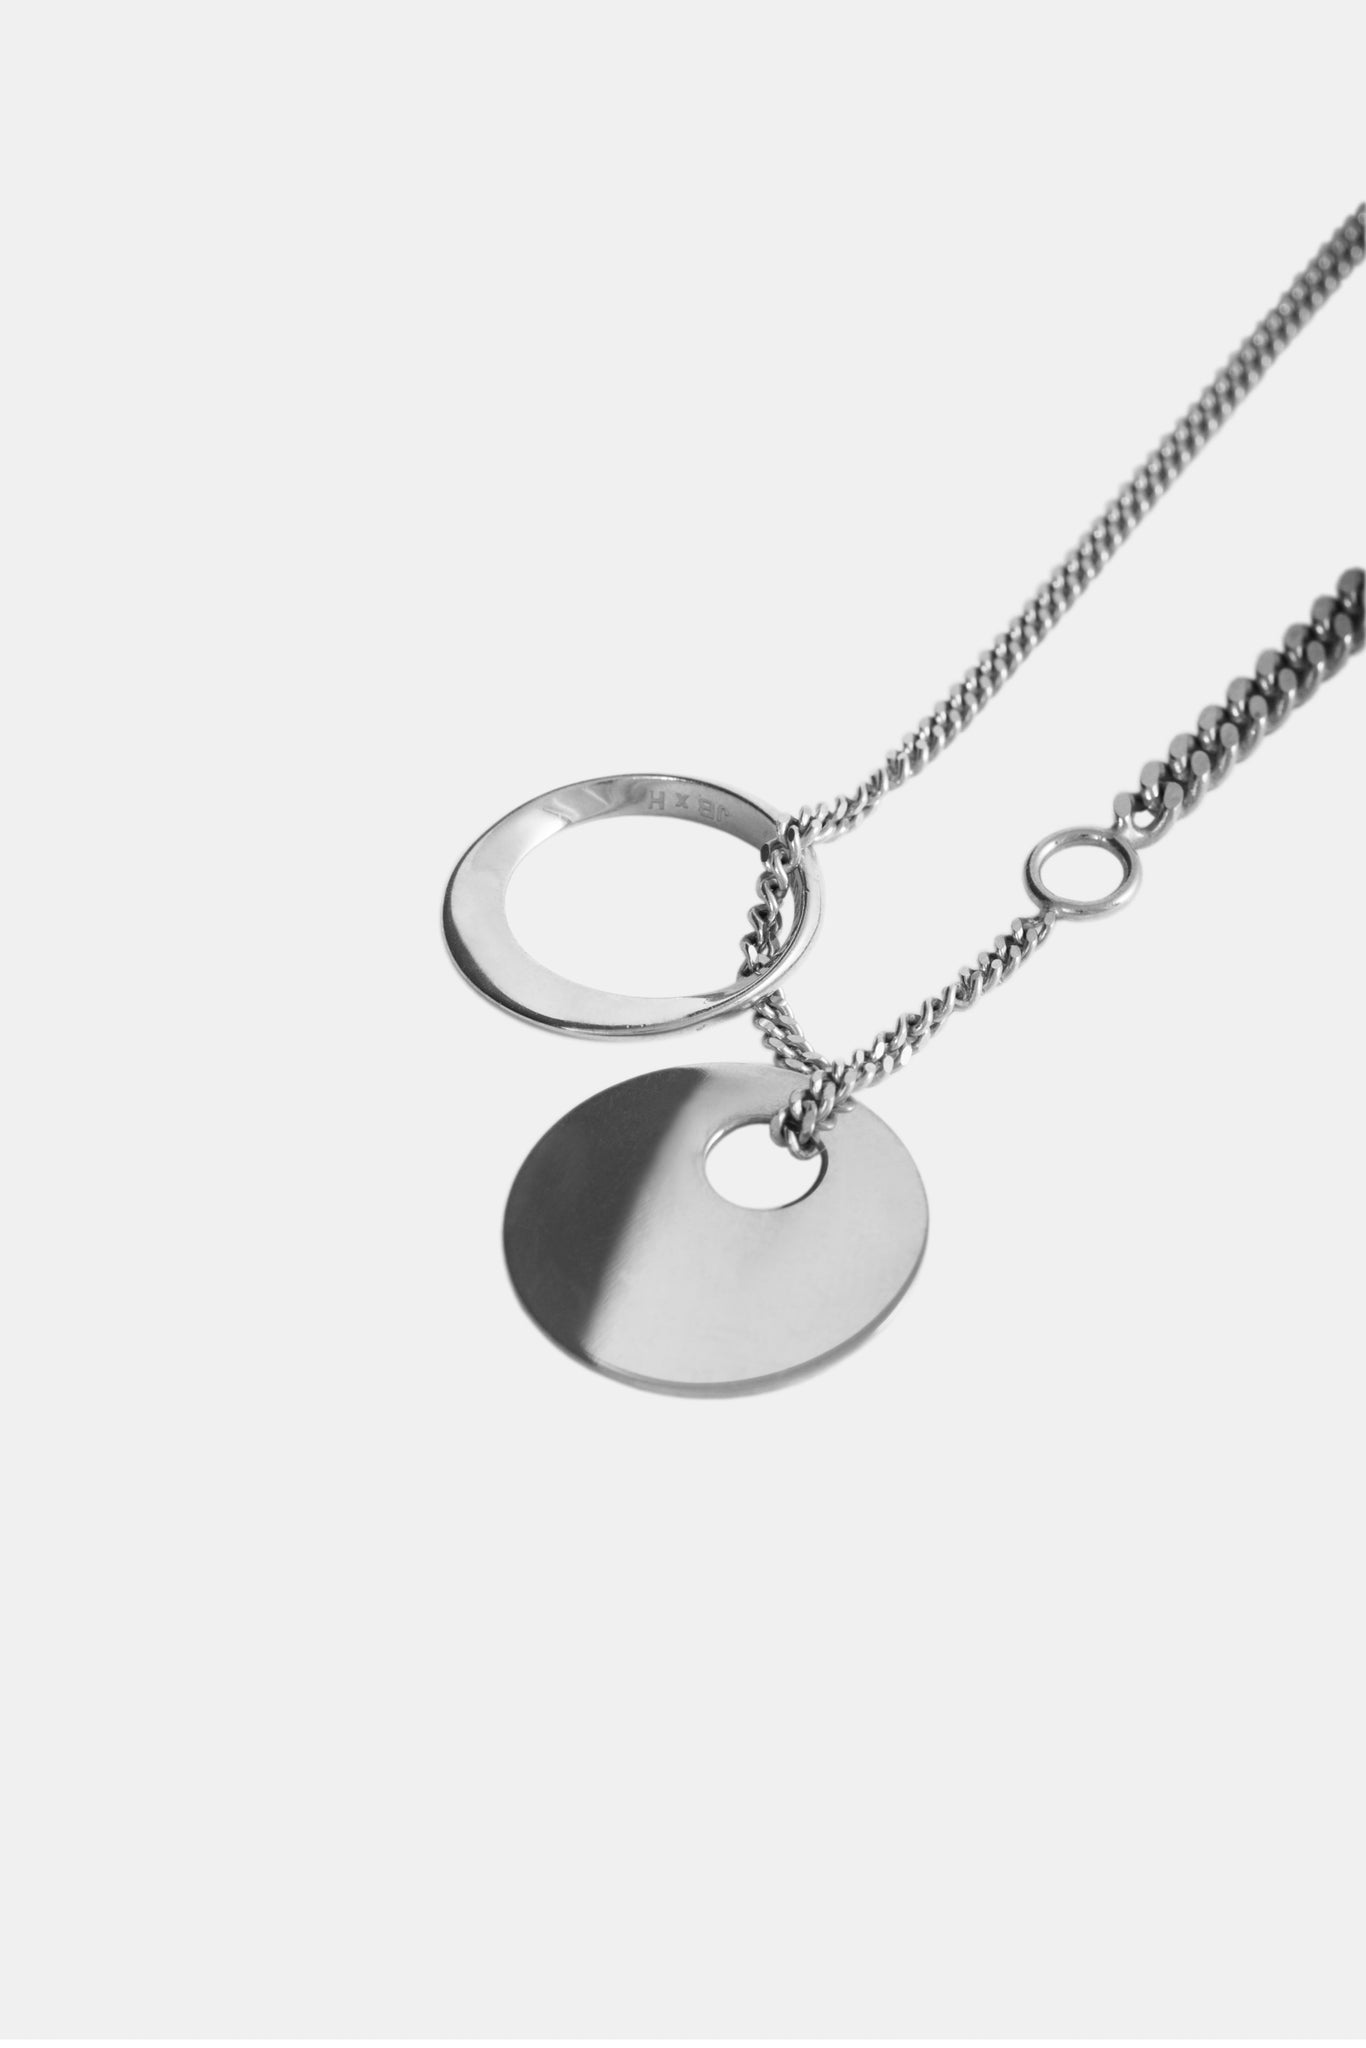 TRUST Necklace, white gold